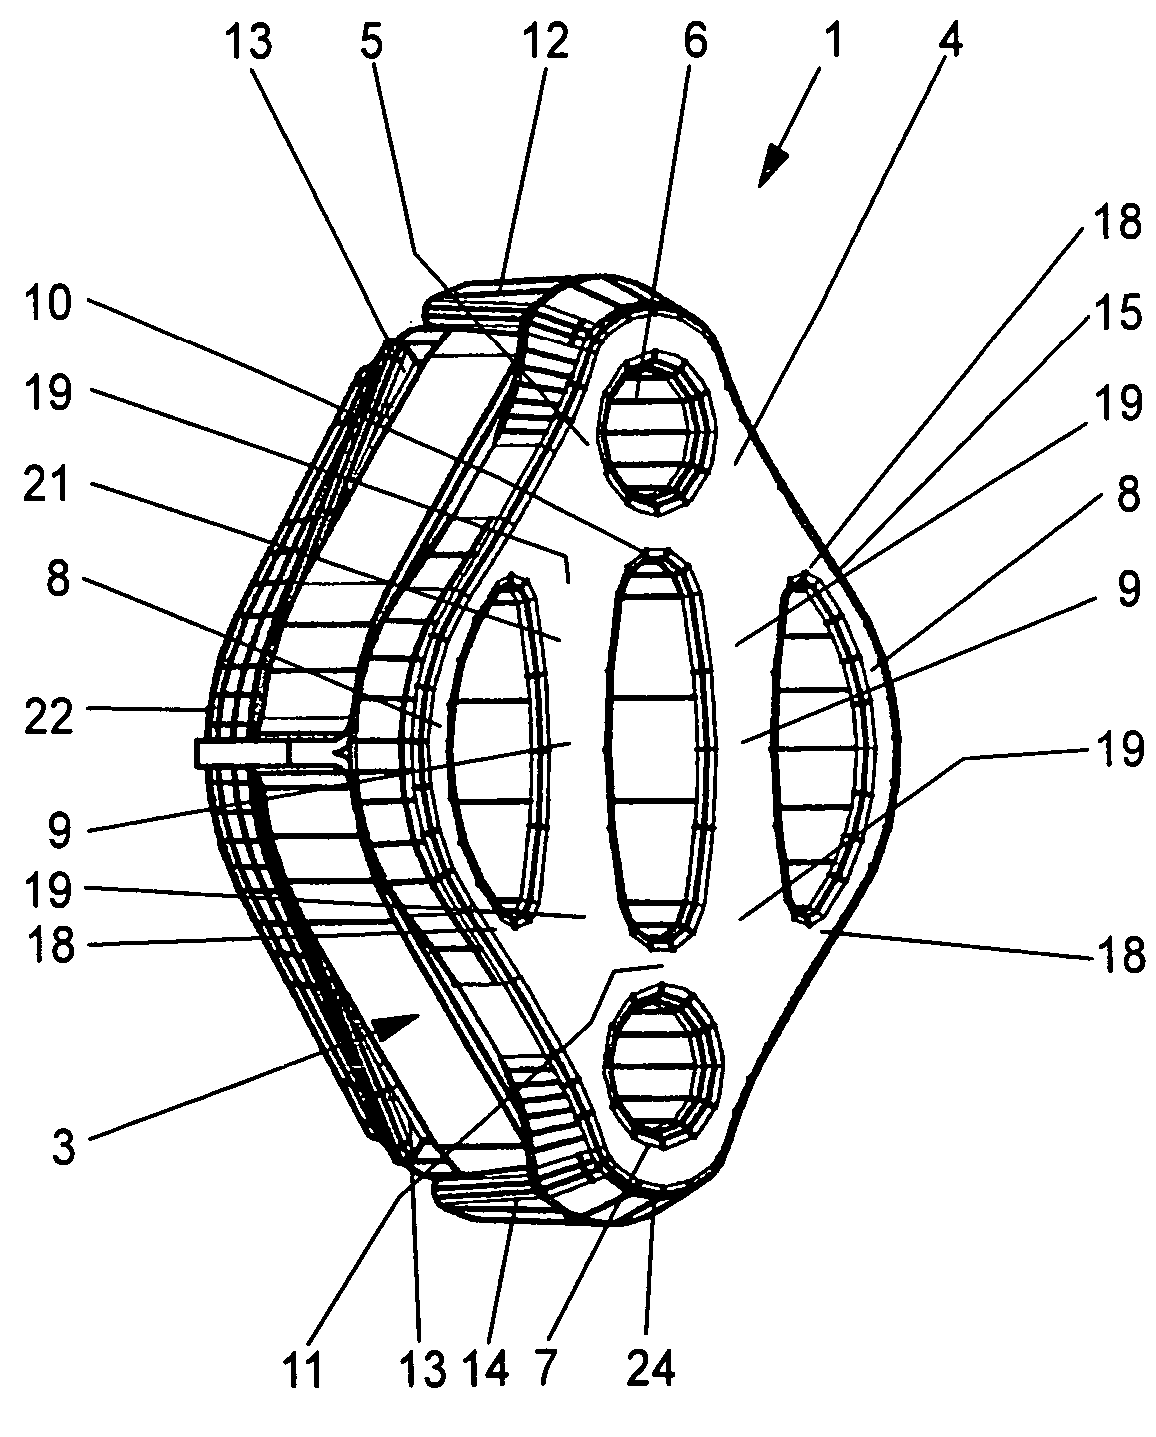 Elastic loop for suspending the exhaust system of a motor vehicle